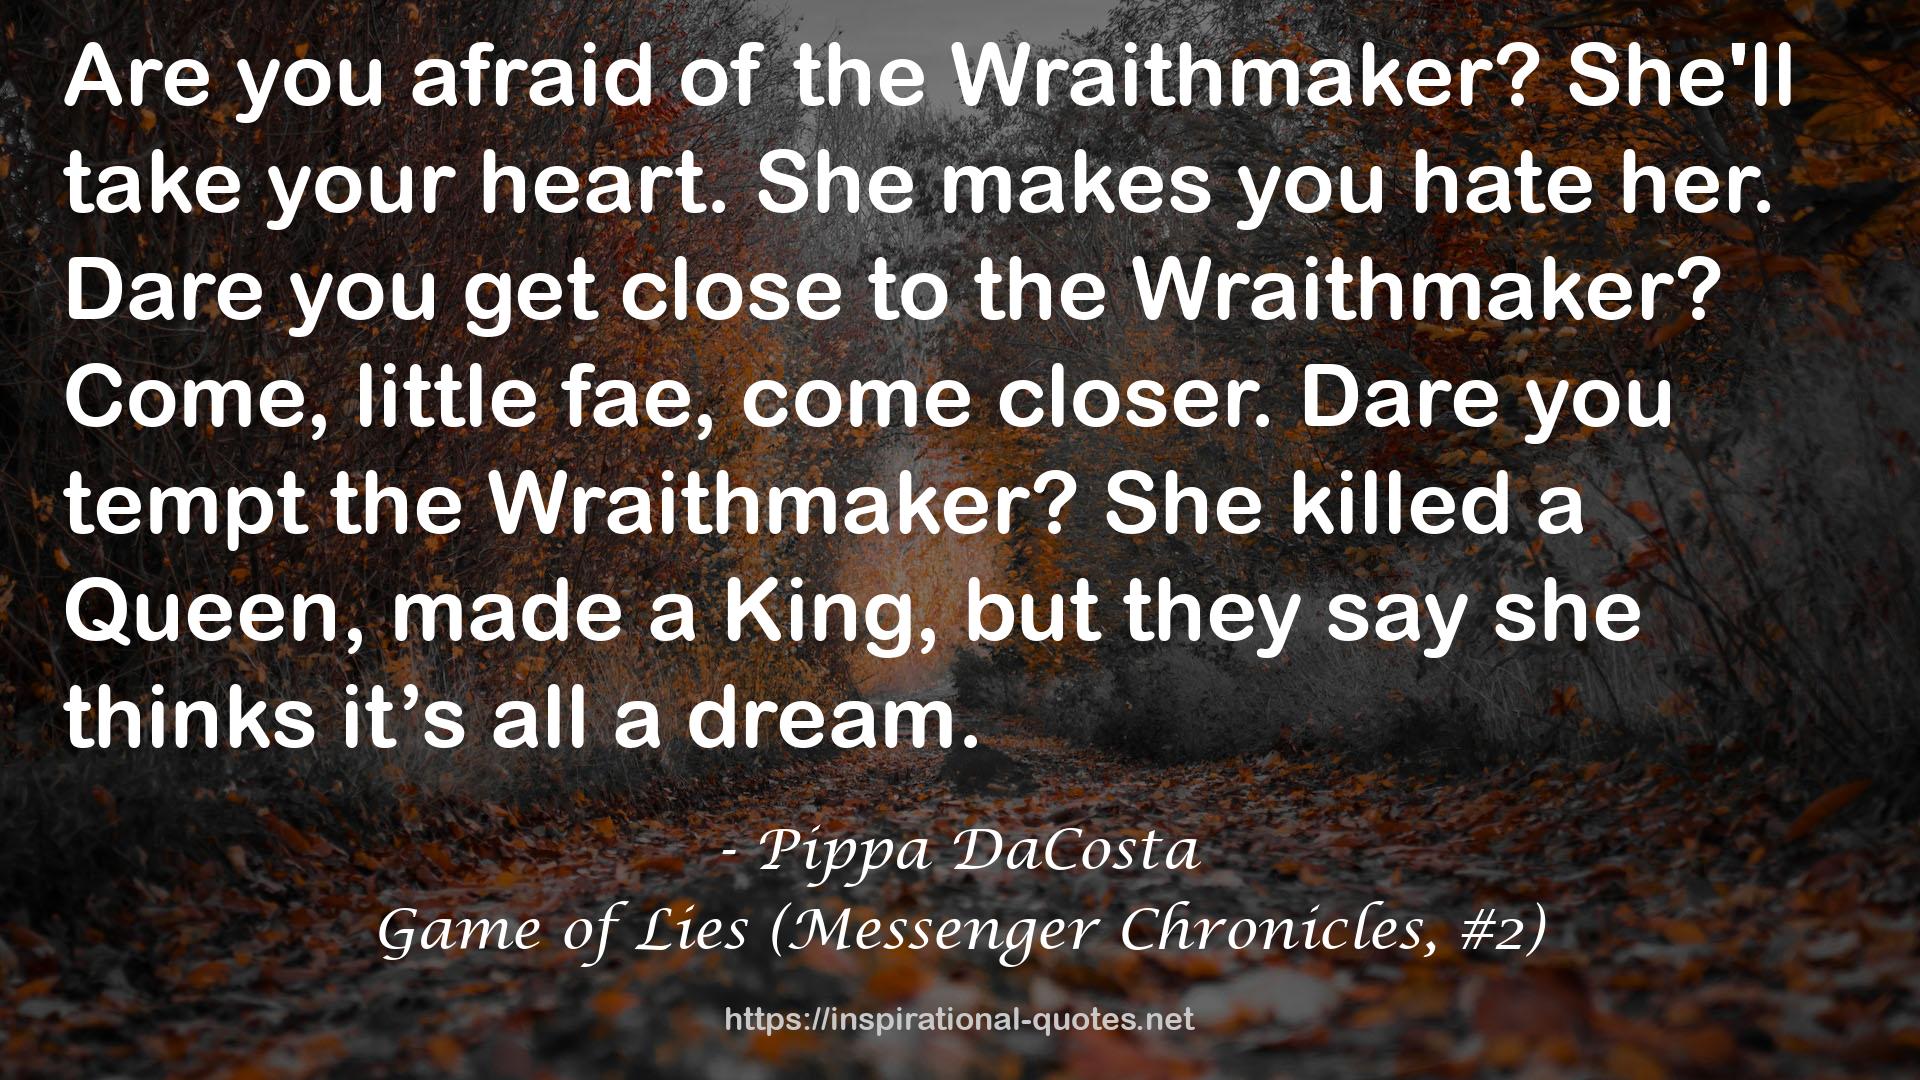 Game of Lies (Messenger Chronicles, #2) QUOTES